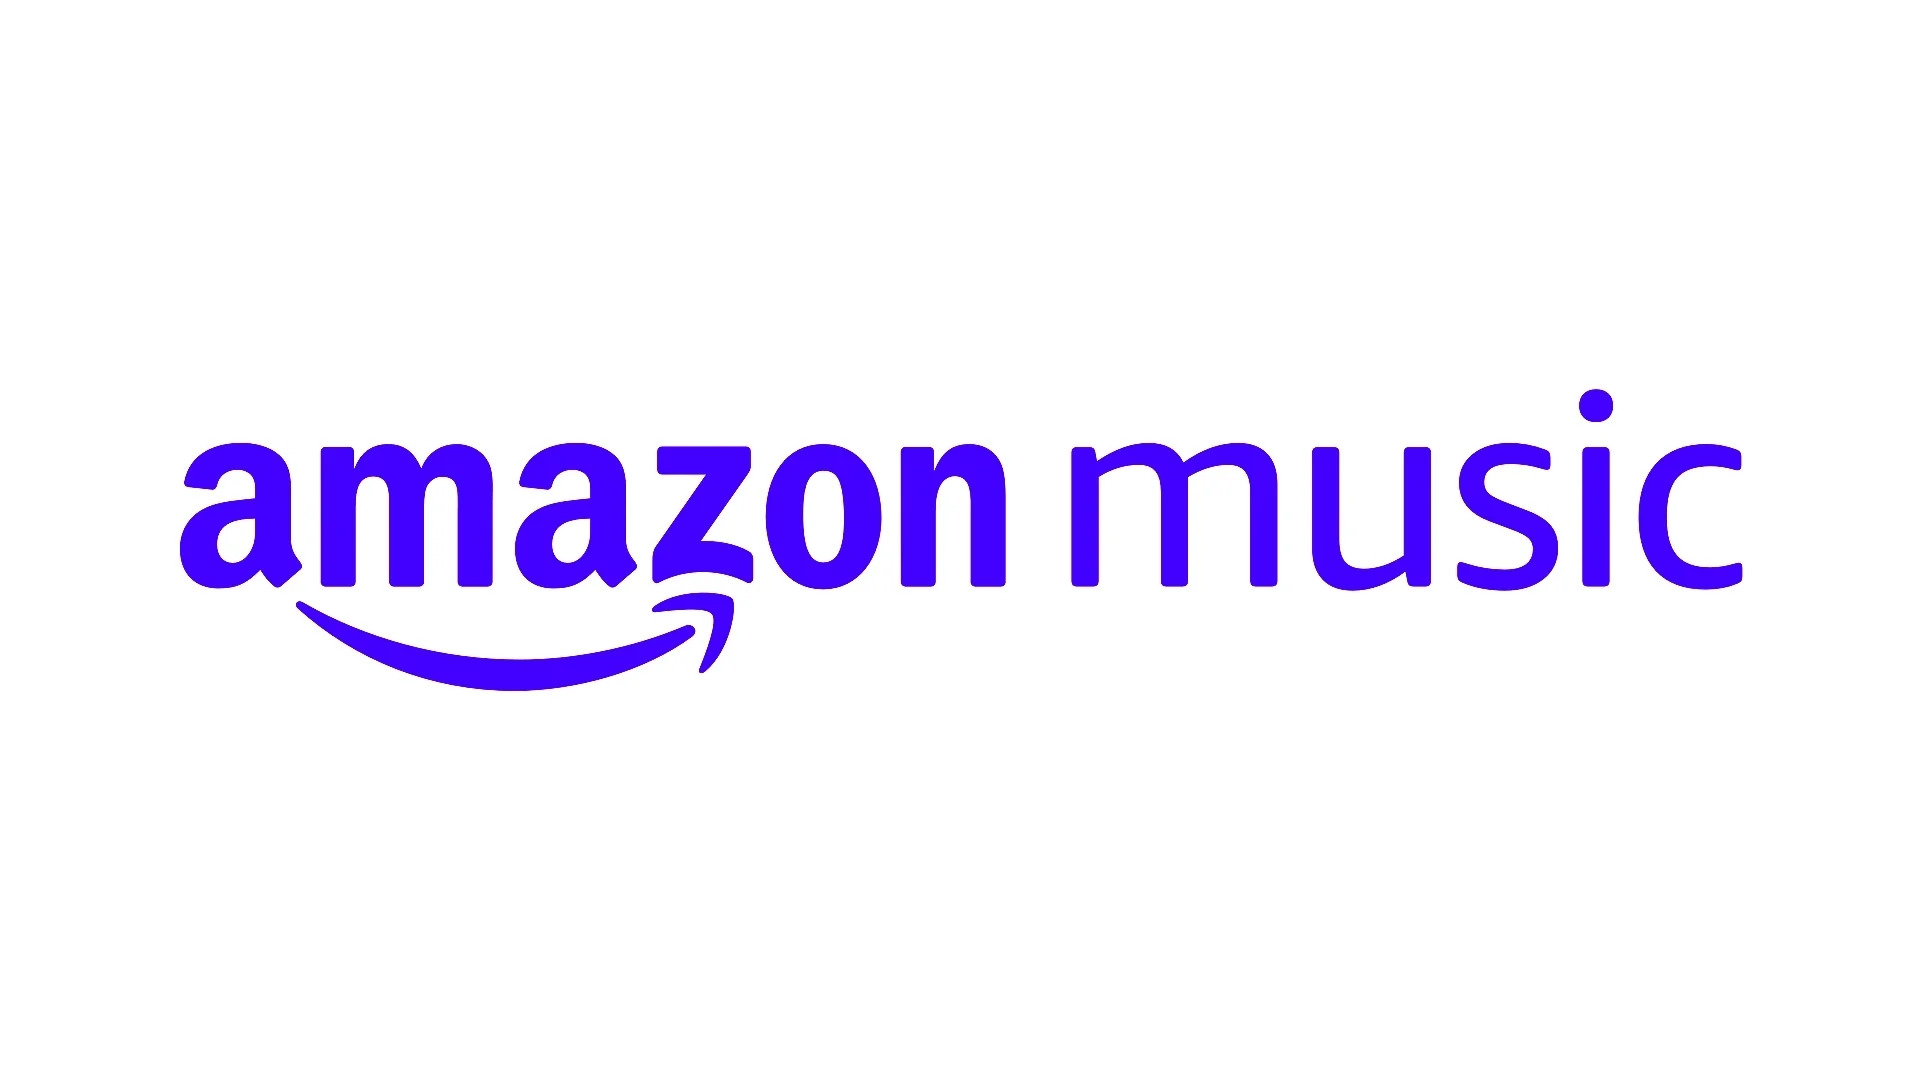 Artificial intelligence for your music: Amazon Music launches Maestro